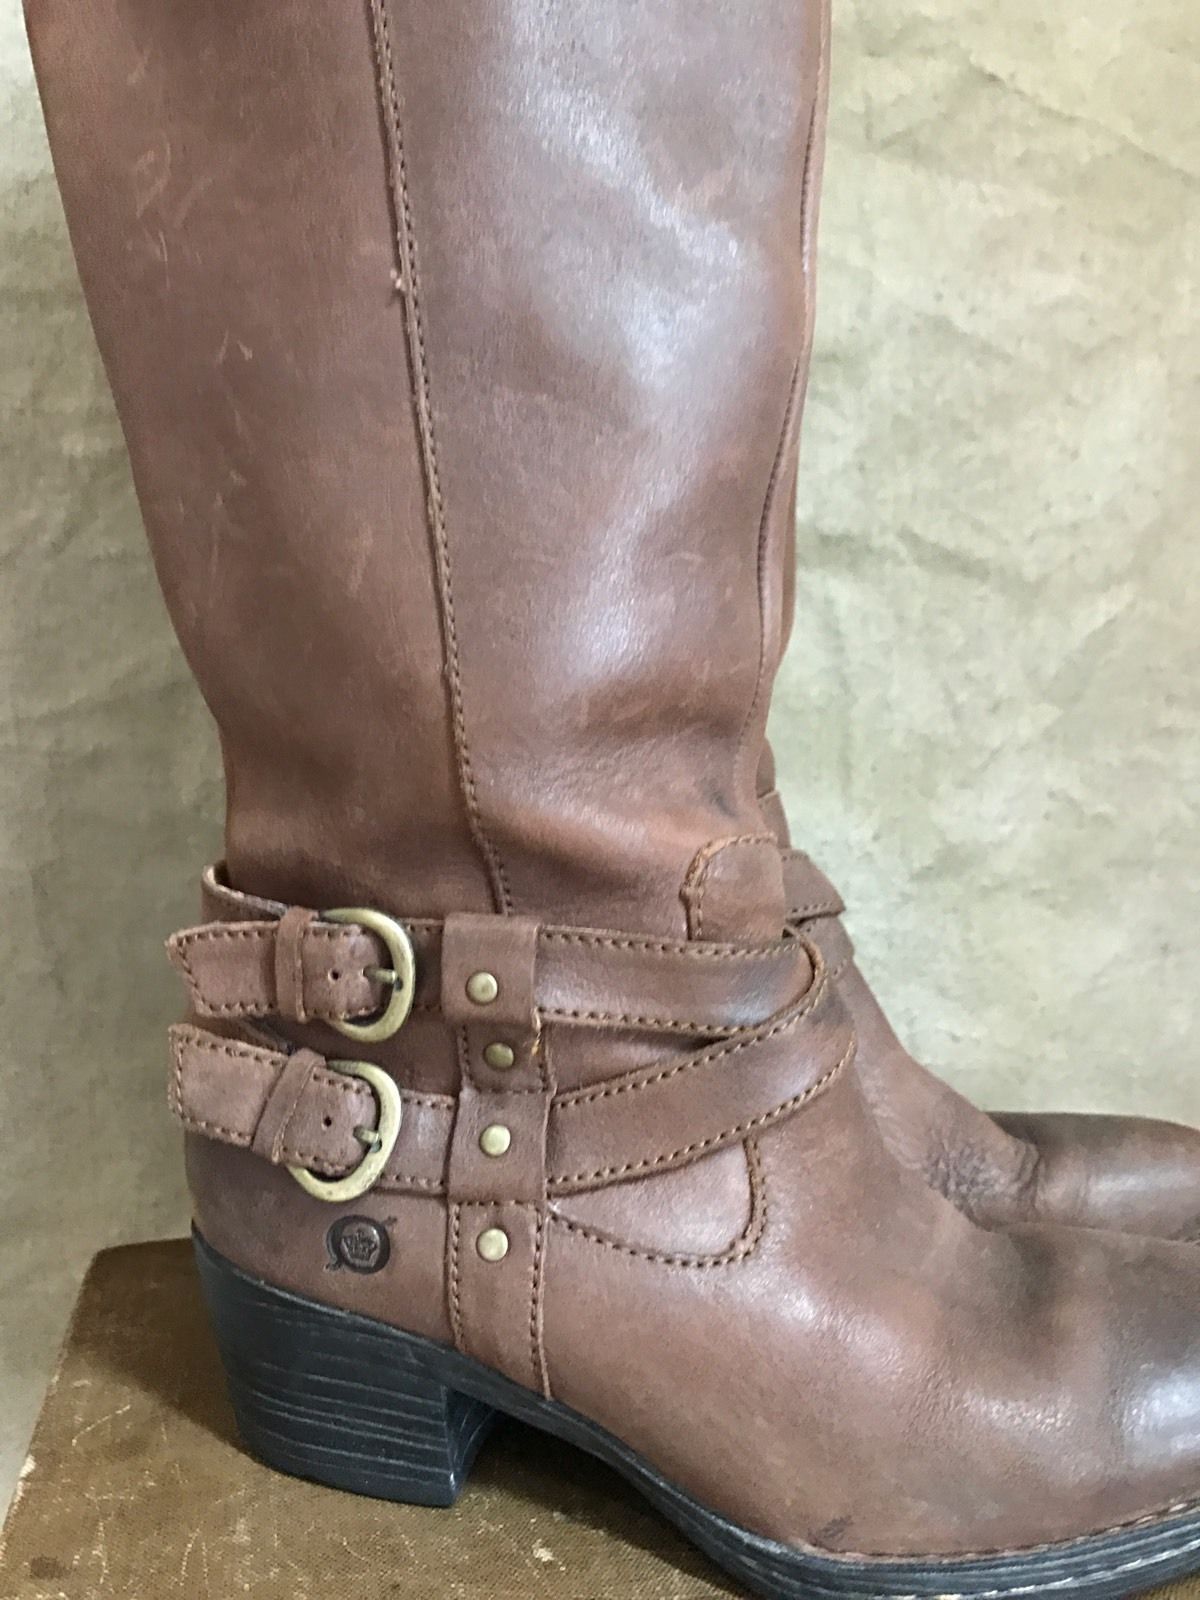 born buckle leather boots